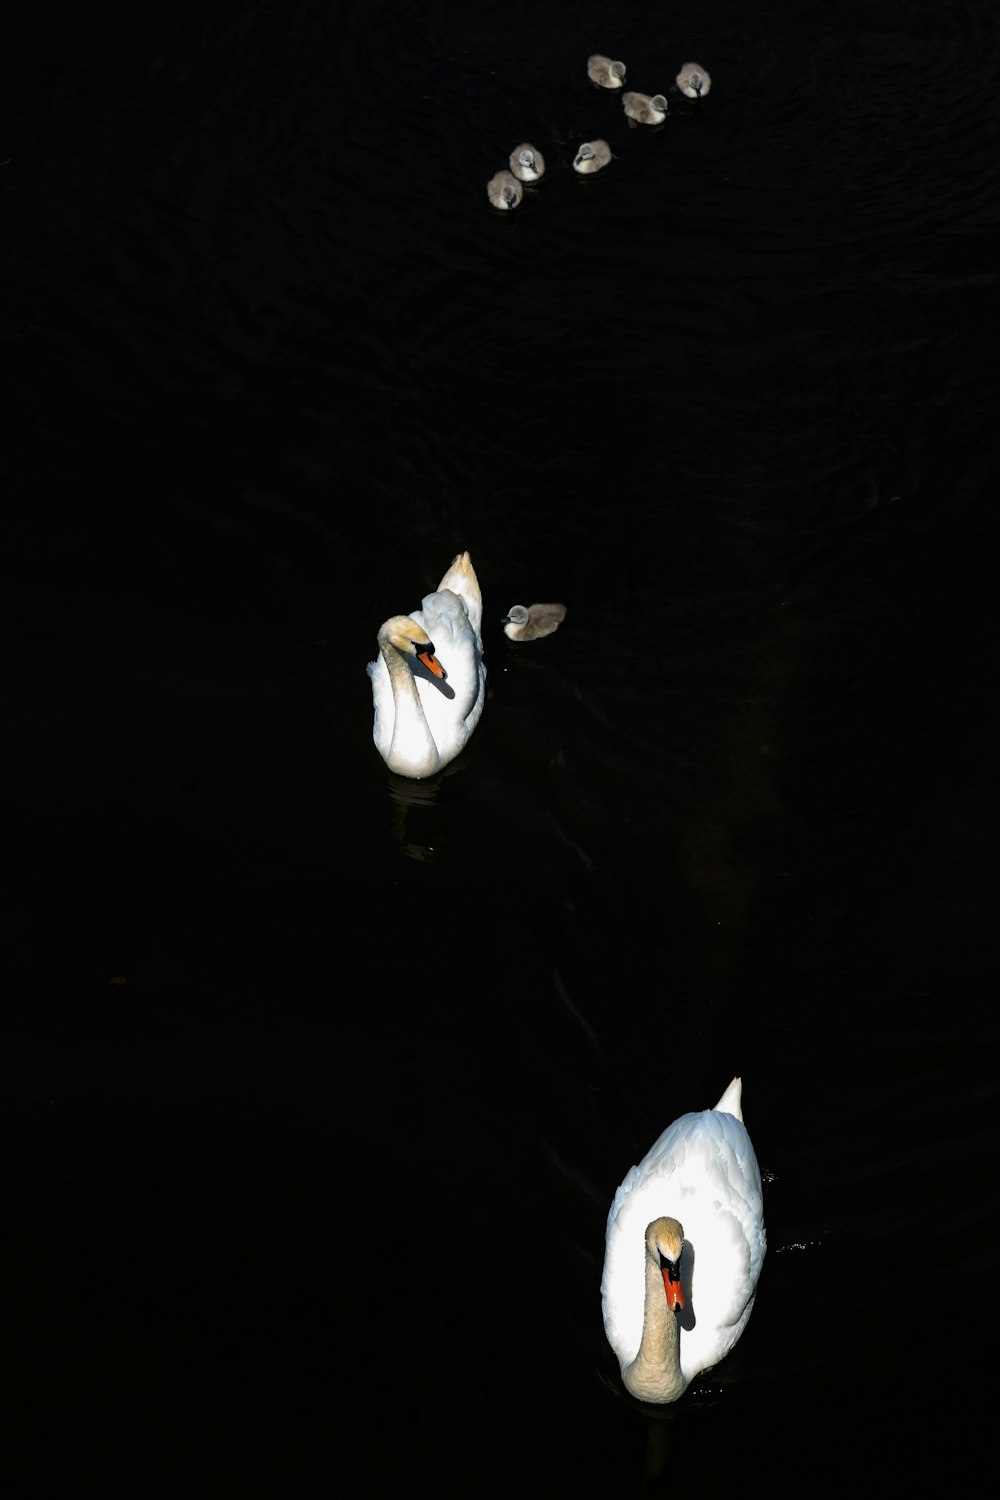 two white swans